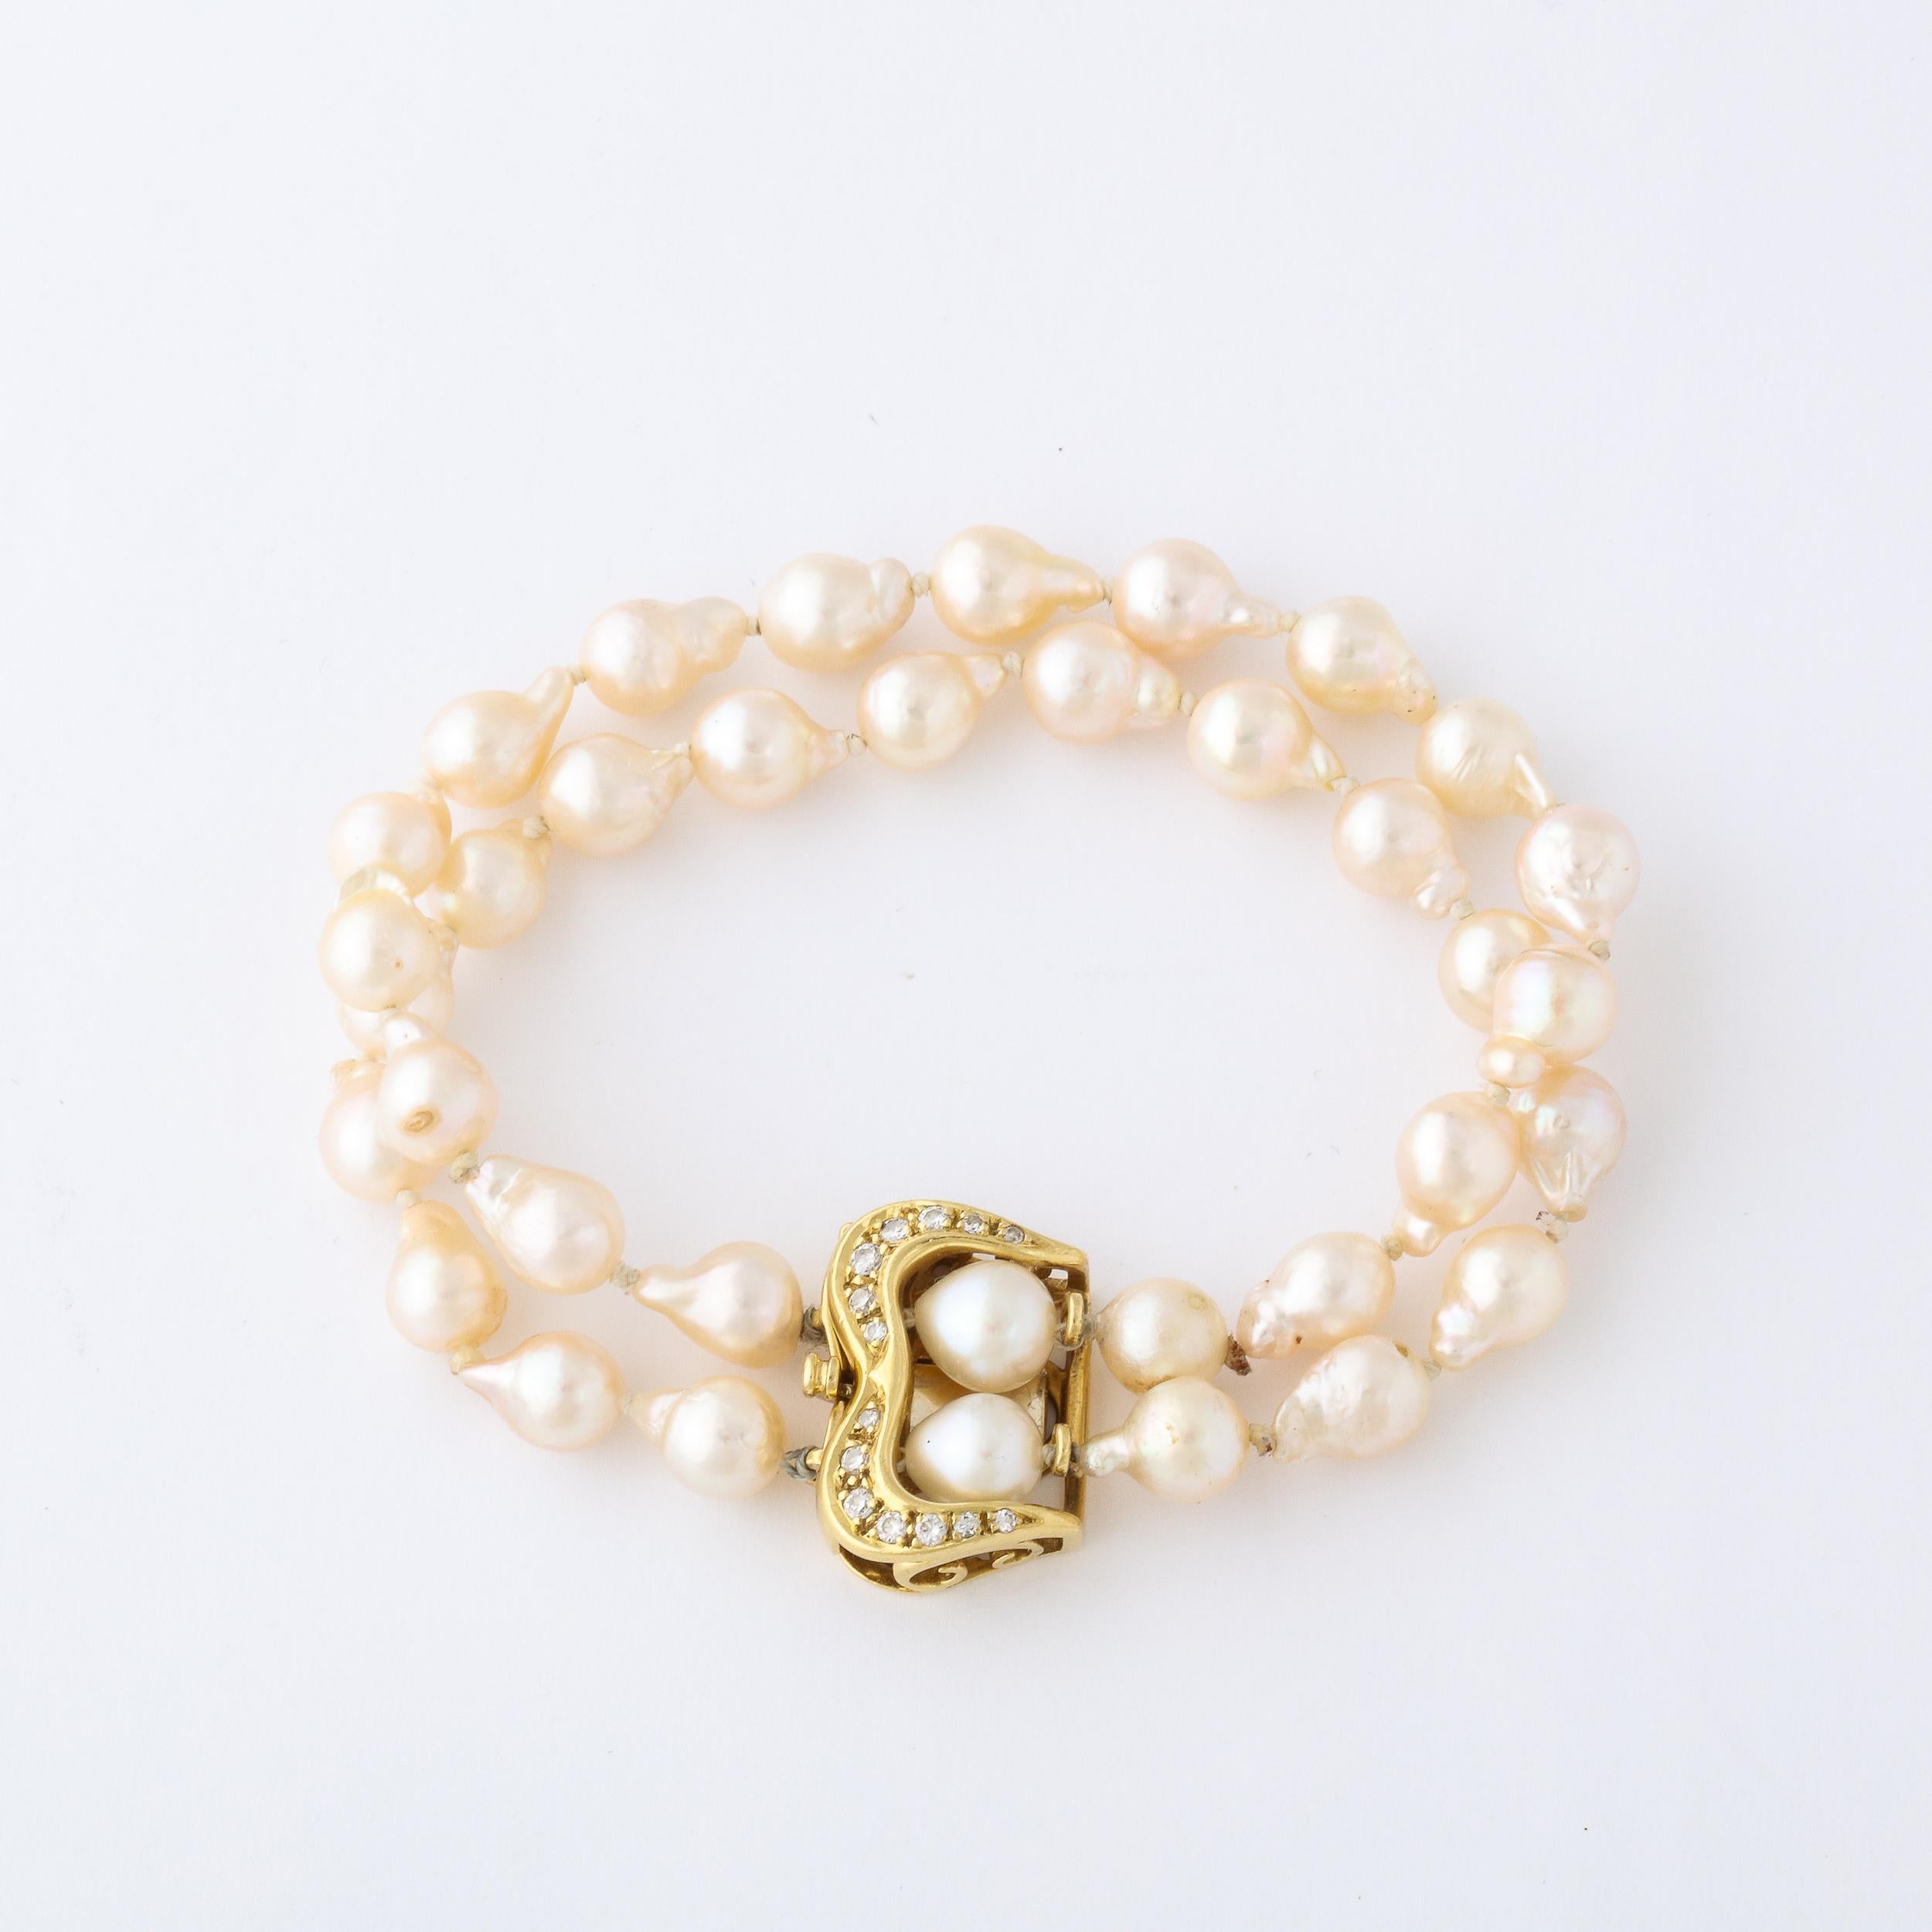 This Modernist double strand pearl bracelet is set with 34 water pearls and fitted with a 18k yellow gold buckle style clasp set with 14 single cut diamonds and 2 water pearls . This bracelet has an organic, modernist and yet classic feel . A very